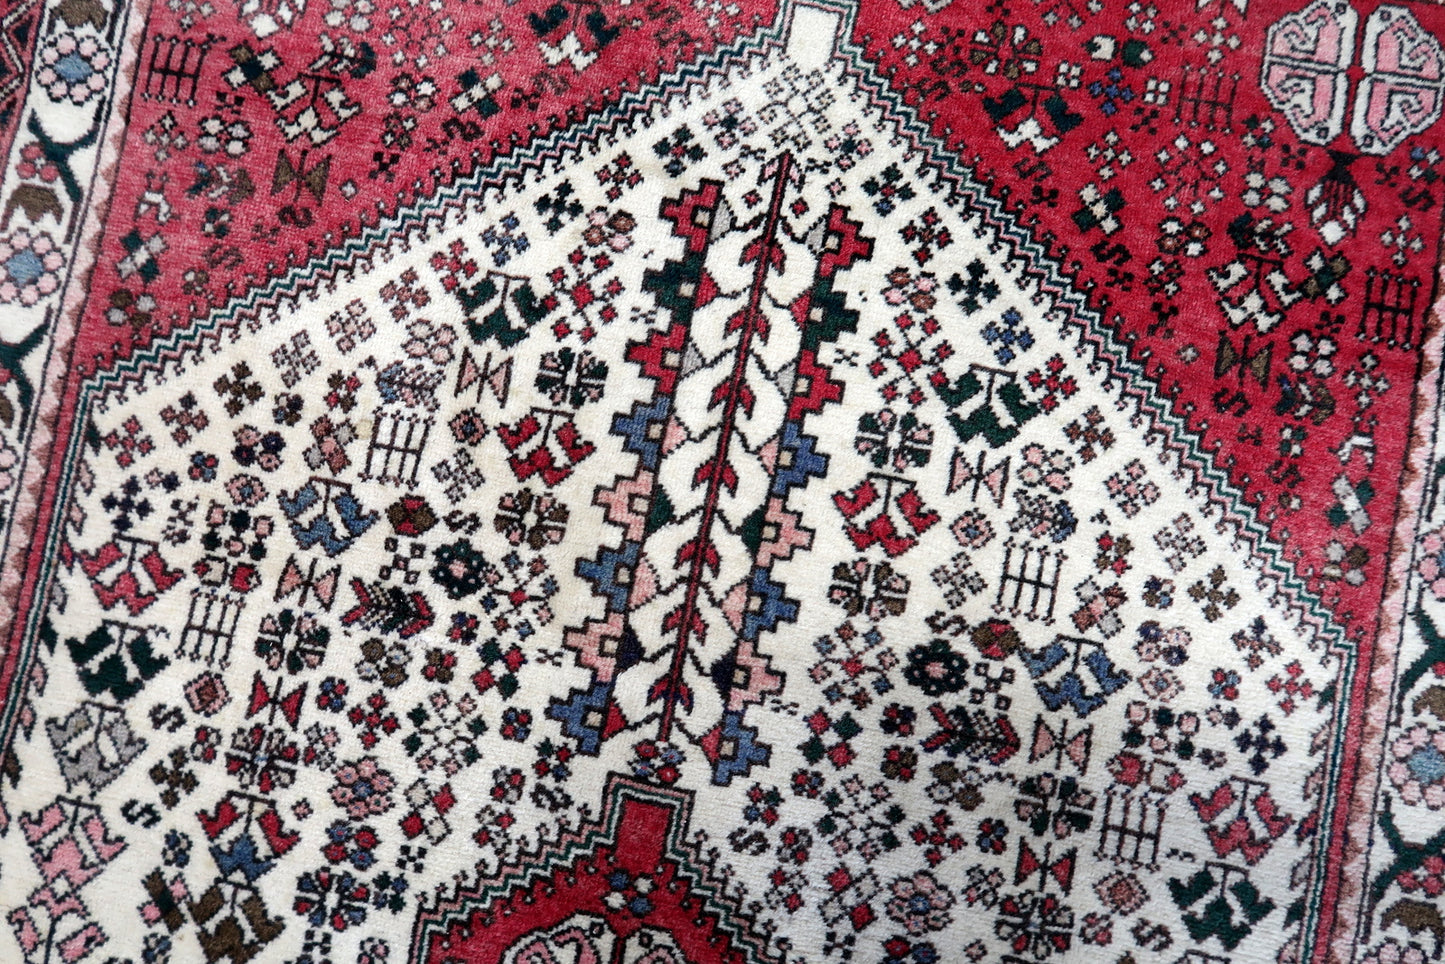 Close-up of the intricate geometric design in the central part of the rug